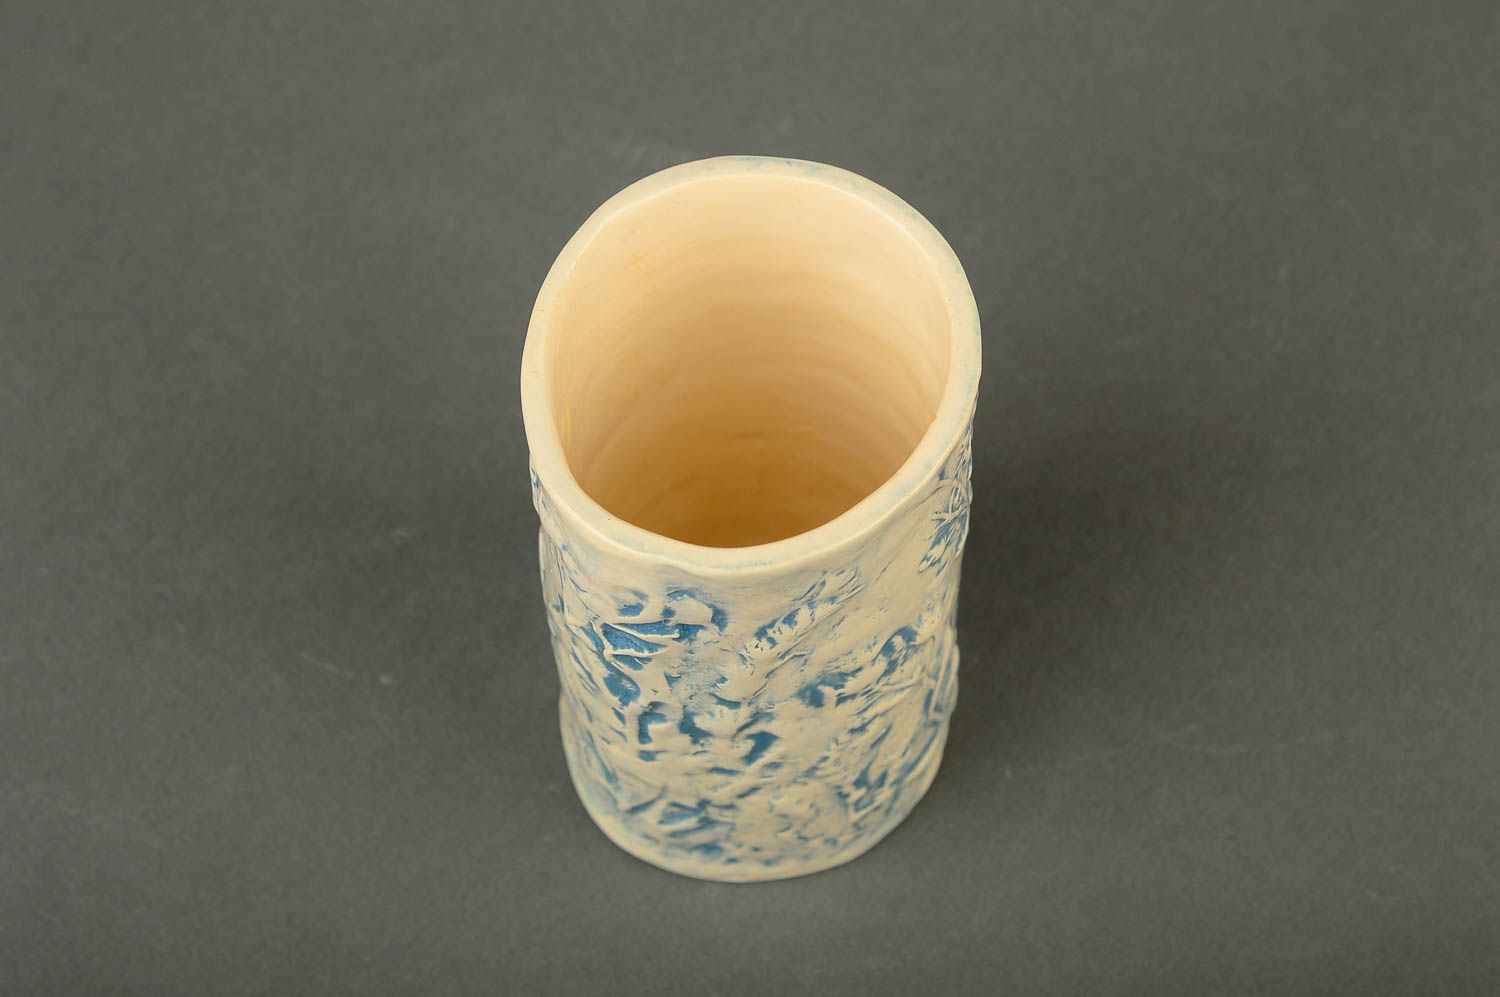 Milk ceramic handmade mug in white and blue color with floral pattern 0,54 lb photo 4